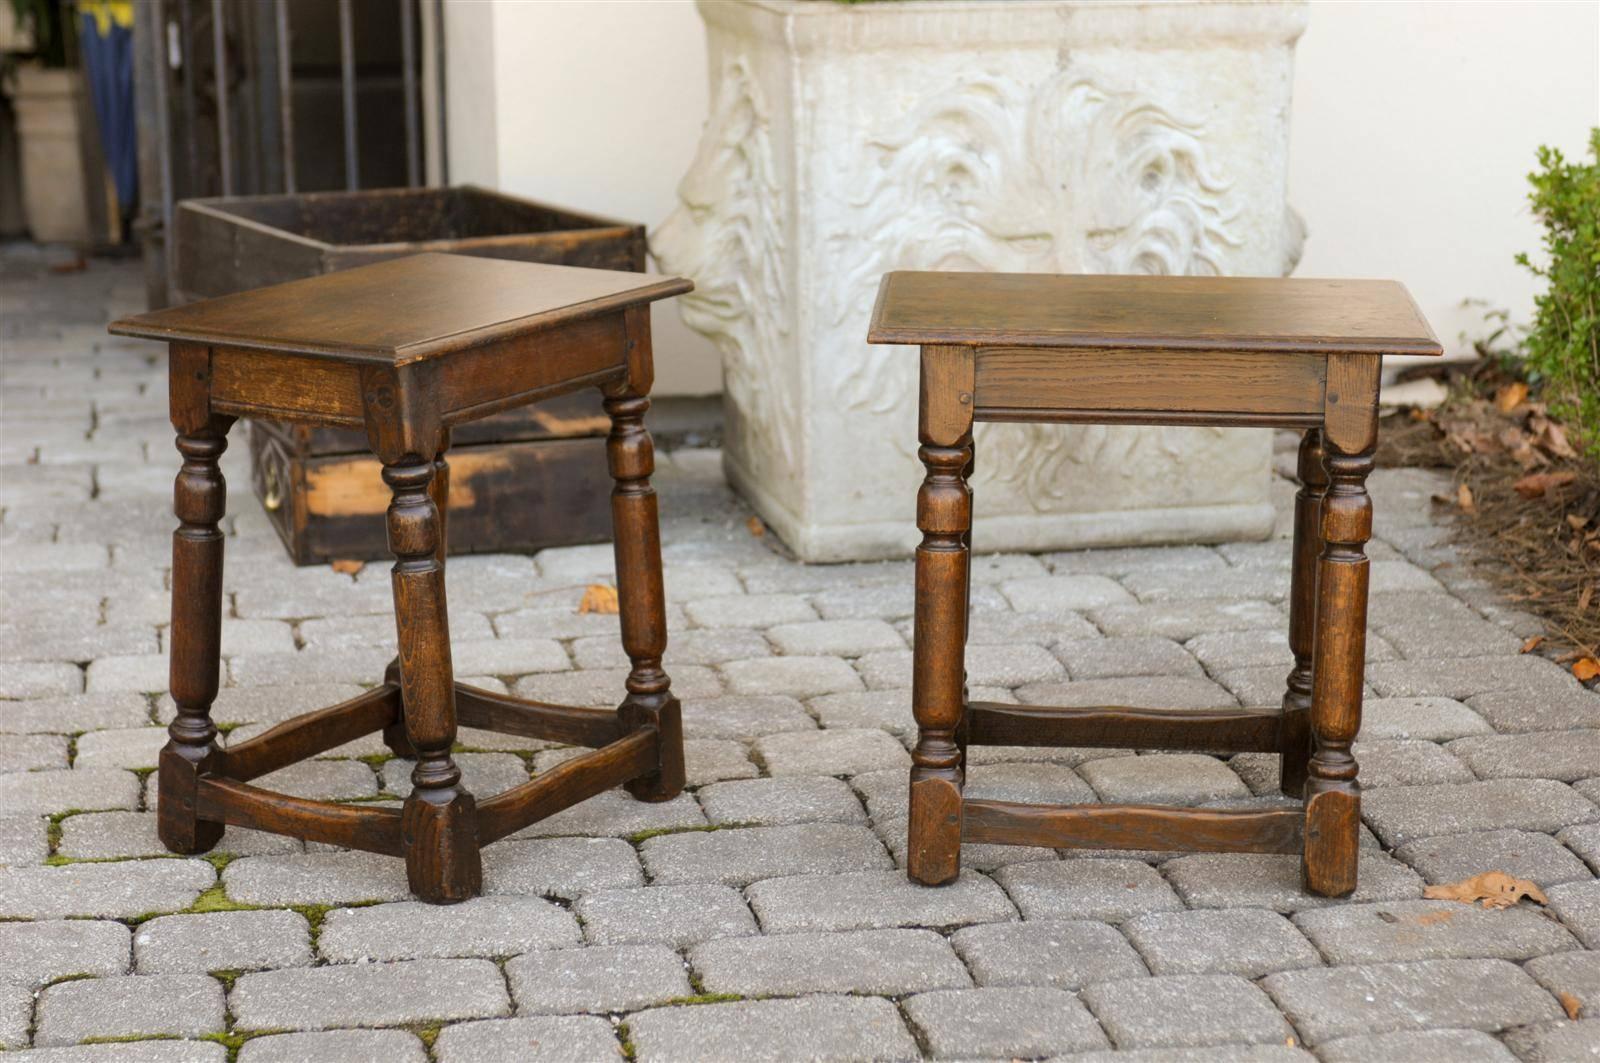 Pair of English joint stools.